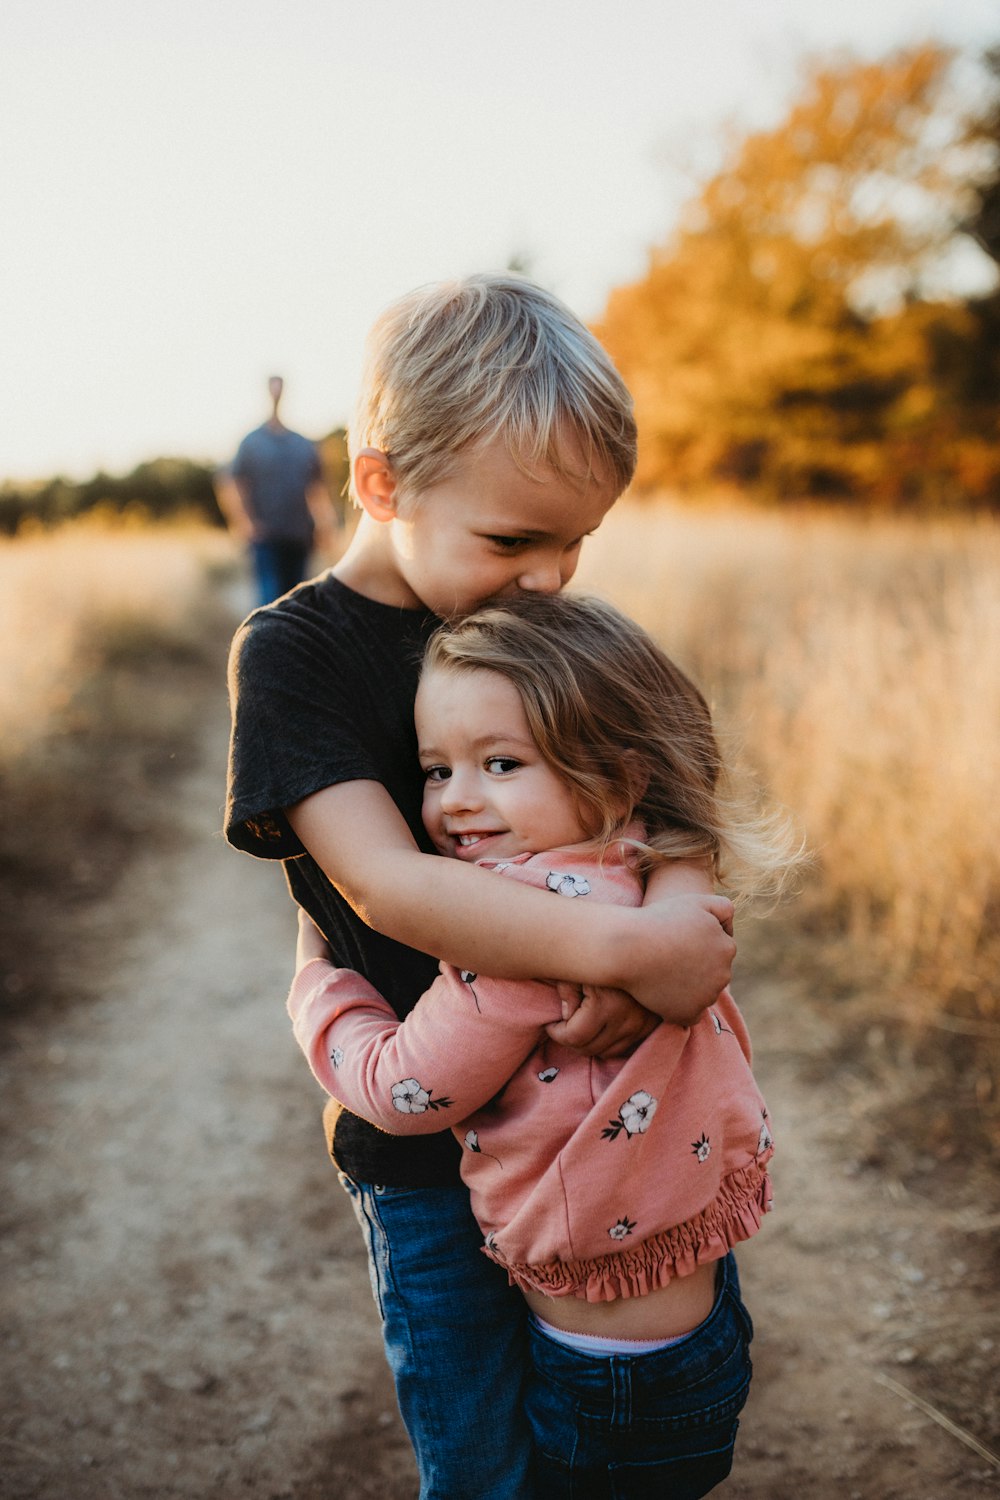 100+ Brother And Sister Pictures | Download Free Images on Unsplash